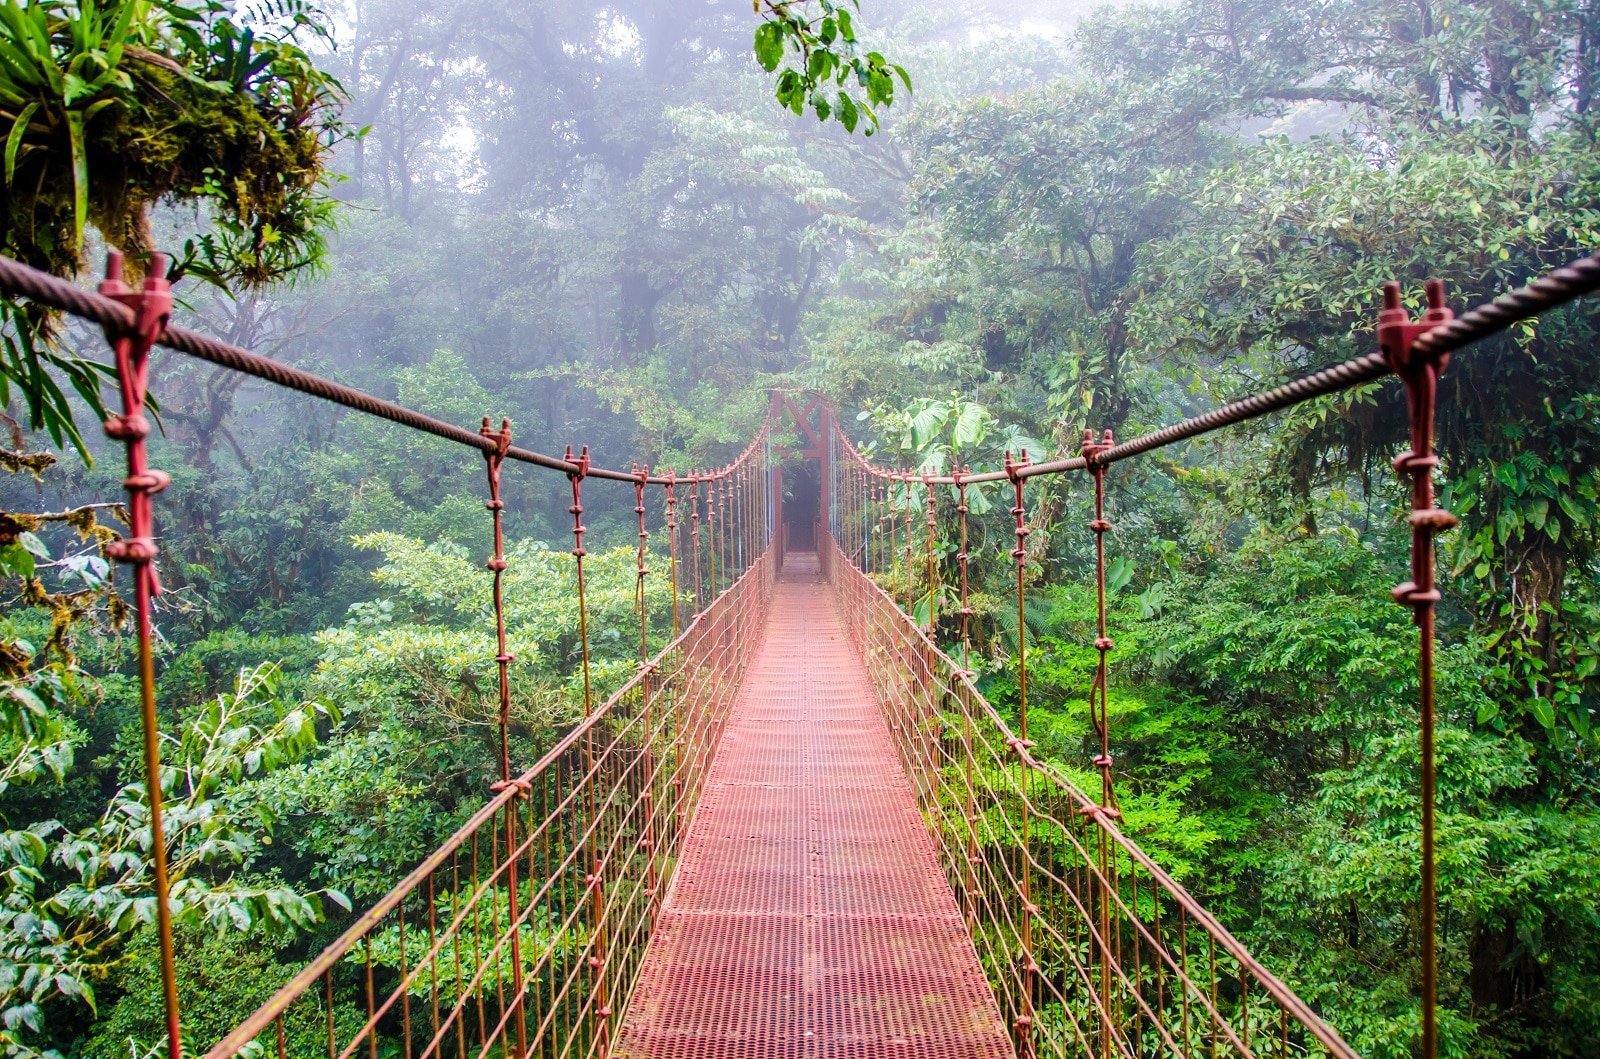 <p><span>In Costa Rica’s Monteverde Cloud Forest Reserve, you’ll find yourself engulfed in a misty, biodiverse haven. Here, you can embark on a variety of canopy tours, including zip-lining and traversing hanging bridges, to witness the rich array of flora and fauna from a bird’s-eye view. This area is a haven for birdwatchers, with the resplendent quetzal being a highlight. The unique ecosystem here, combining altitude with moisture, creates an environment where biodiversity thrives, offering an unparalleled opportunity to see a wide range of wildlife and exotic plants.</span></p> <p><b>Insider’s Tip: </b><span>Visit during the early morning hours for the best wildlife viewing opportunities. </span></p> <p><b>When To Travel: </b><span>The dry season from December to April offers clearer skies and less rain. </span></p> <p><b>How To Get There: </b><span>Monteverde is about a 3-hour drive from San José, Costa Rica’s capital.</span></p>